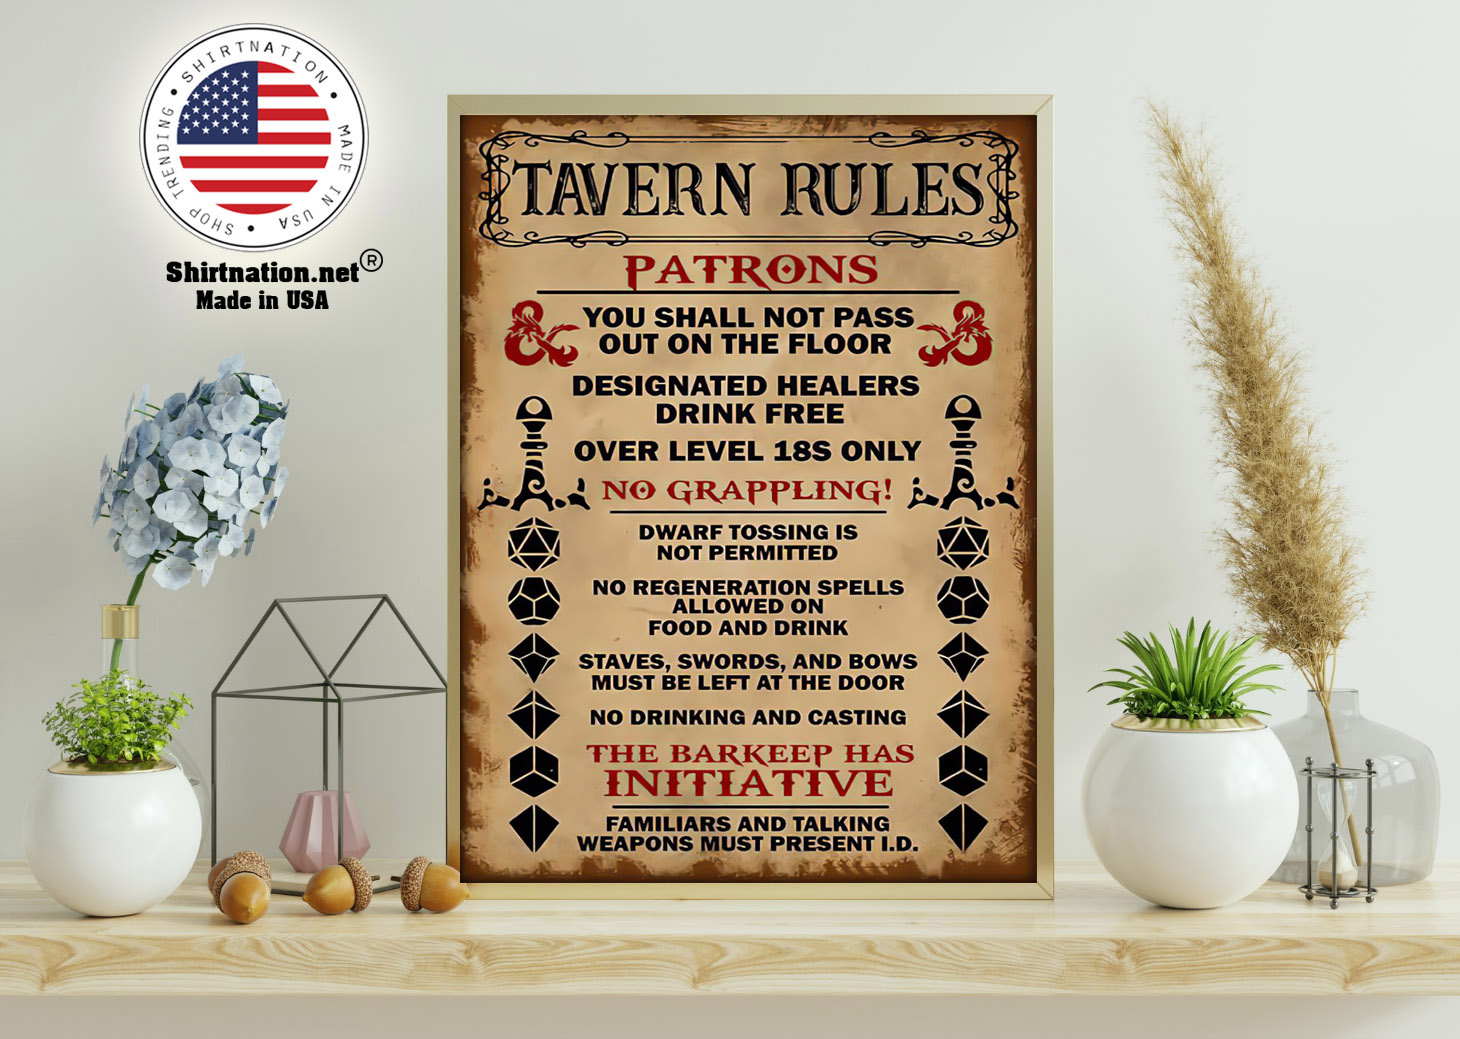 Tavern rules patrons you shall not pass out on the floor poster 11